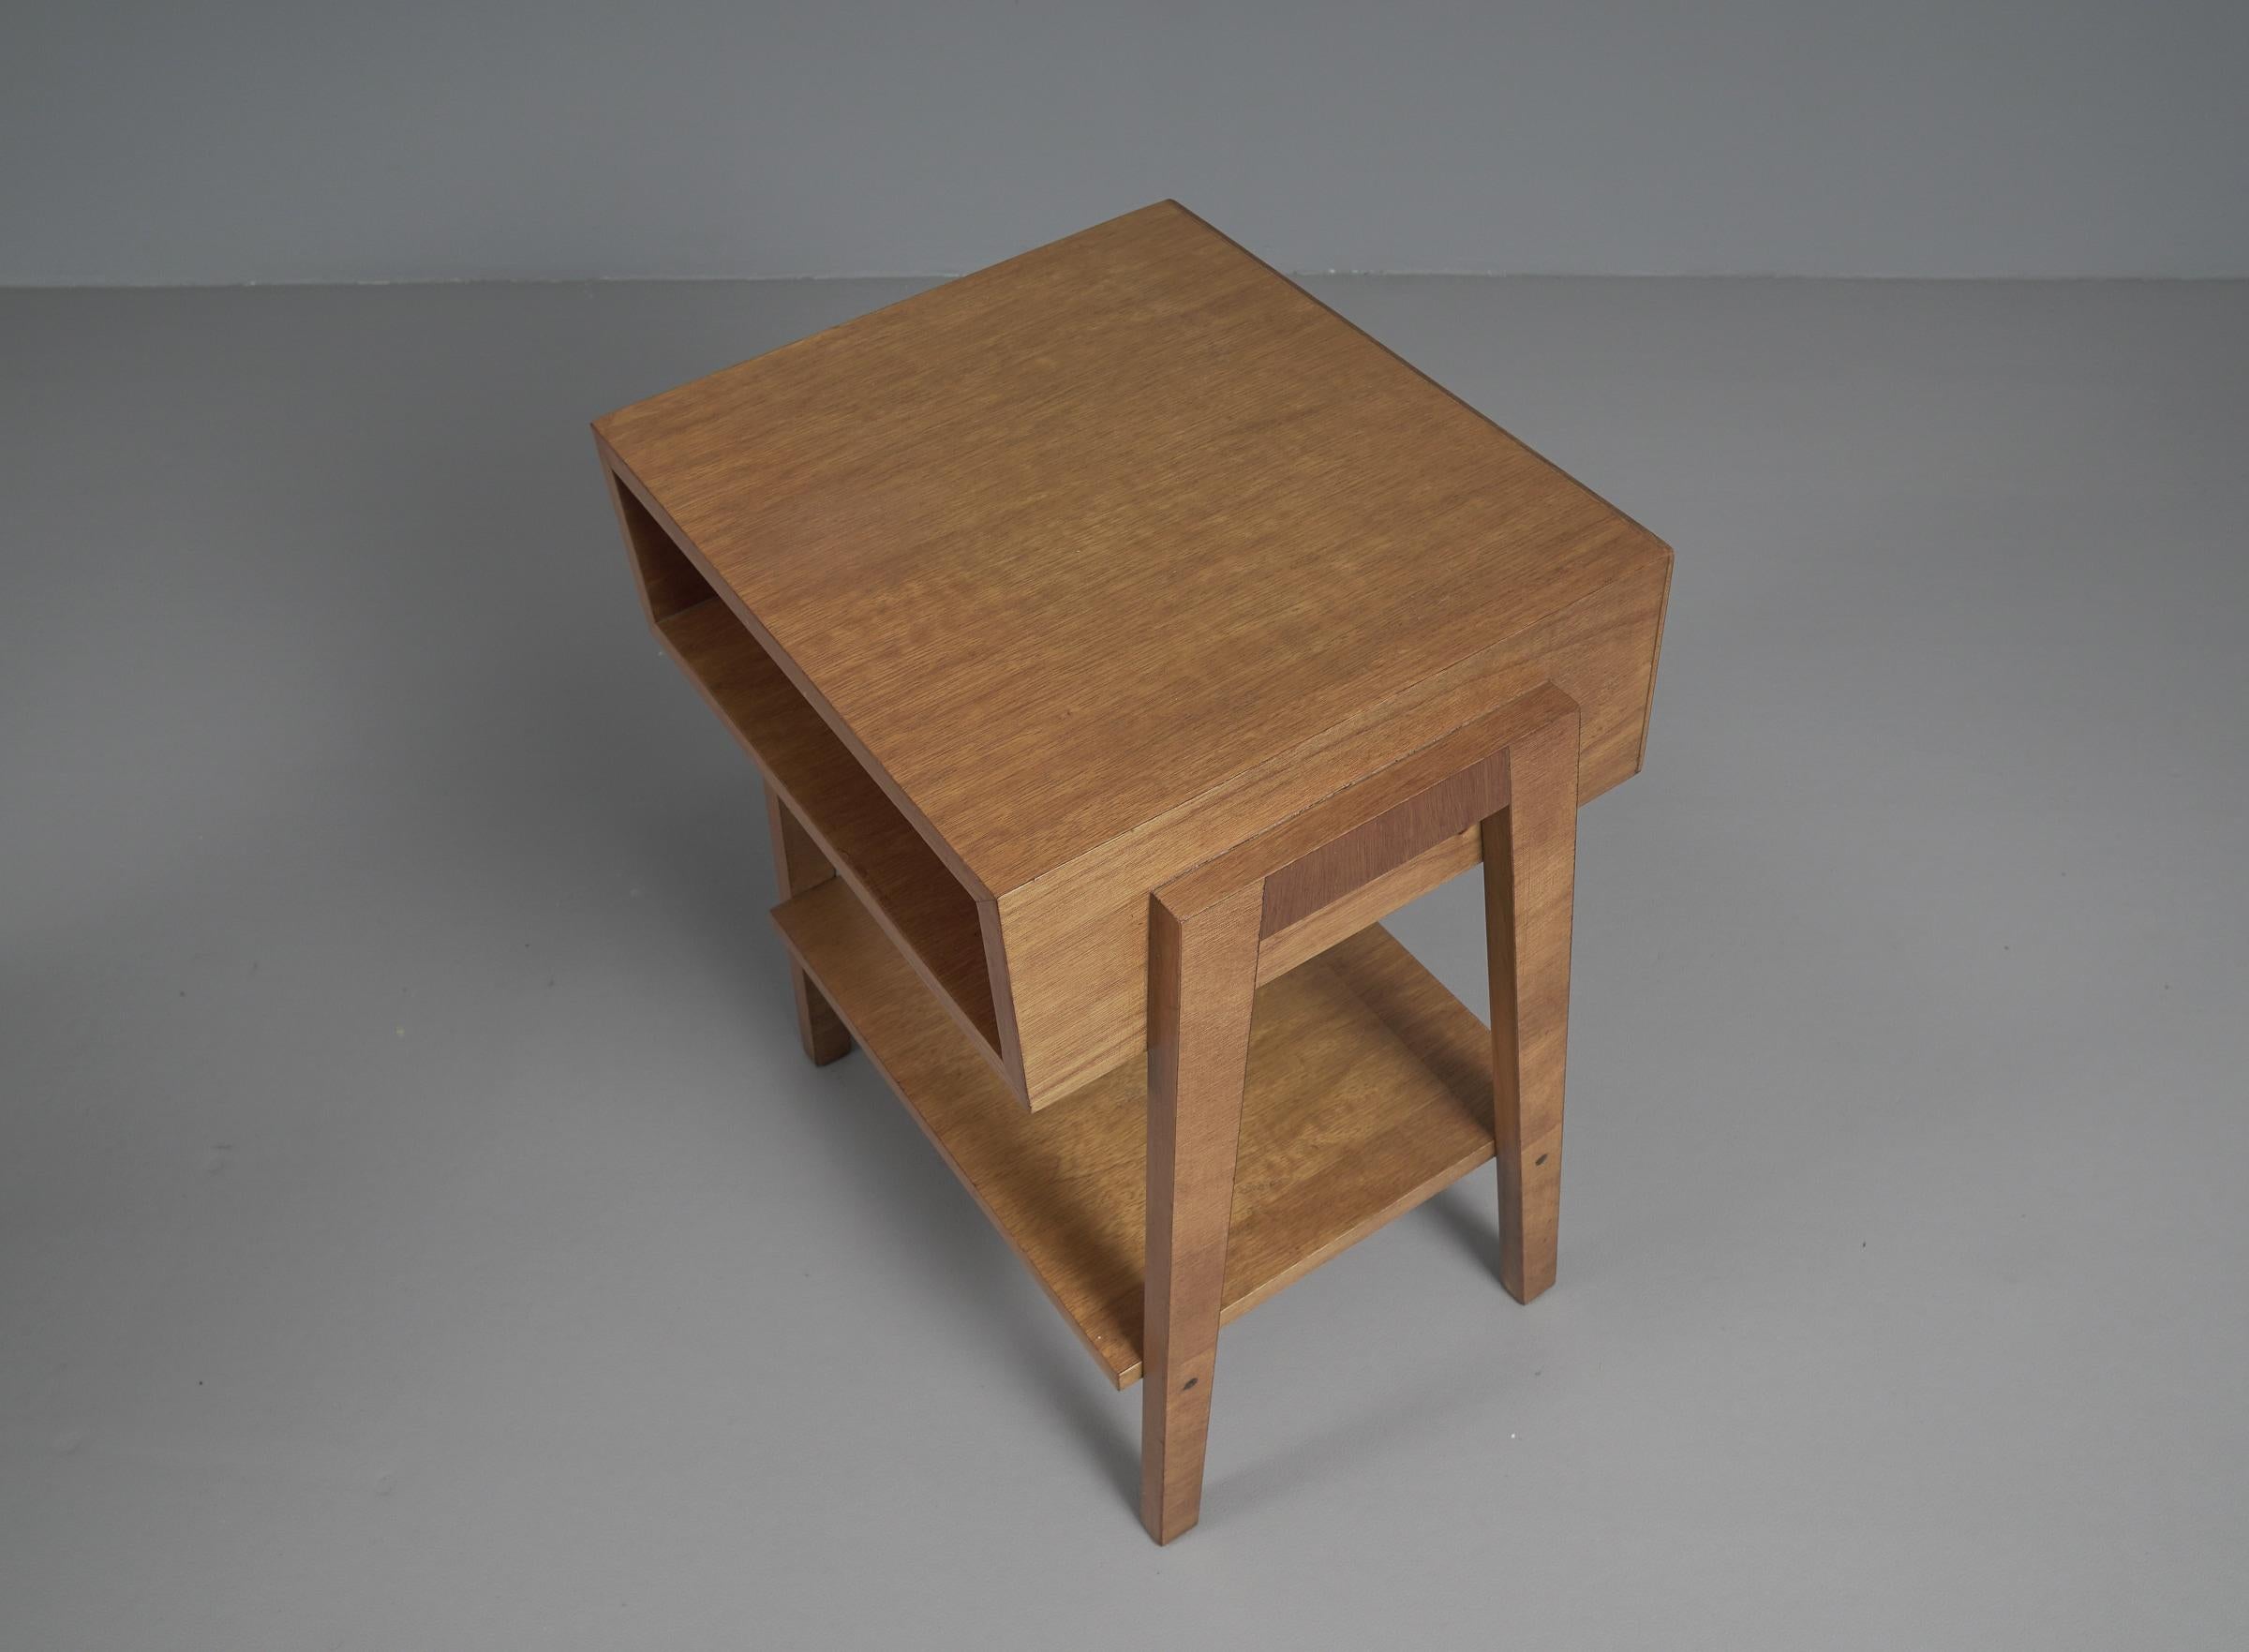  Pair of Minimalistic Mid-Century Modern Wooden Nightstands, Italy 1950s For Sale 5